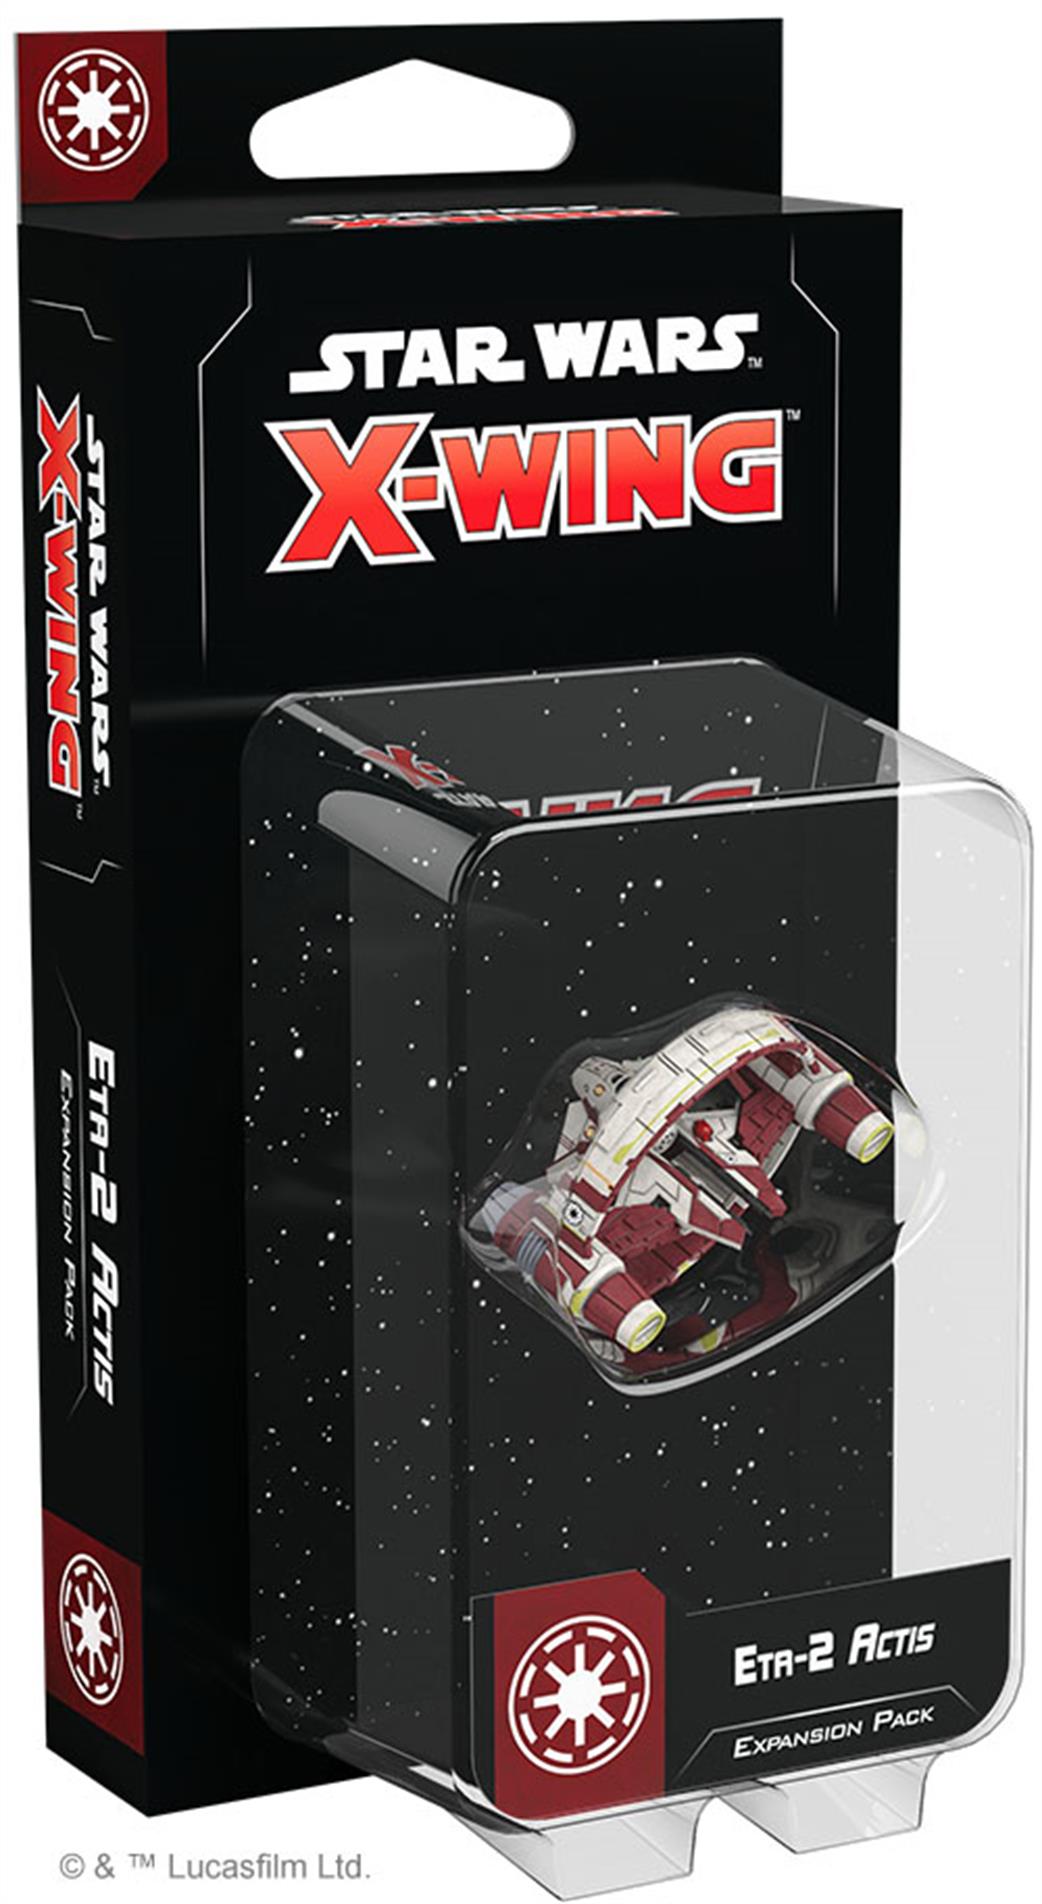 Fantasy Flight Games  SWZ79 Eta-2 Actis Expansion Pack from Star Wars X-Wing 2nd Ed